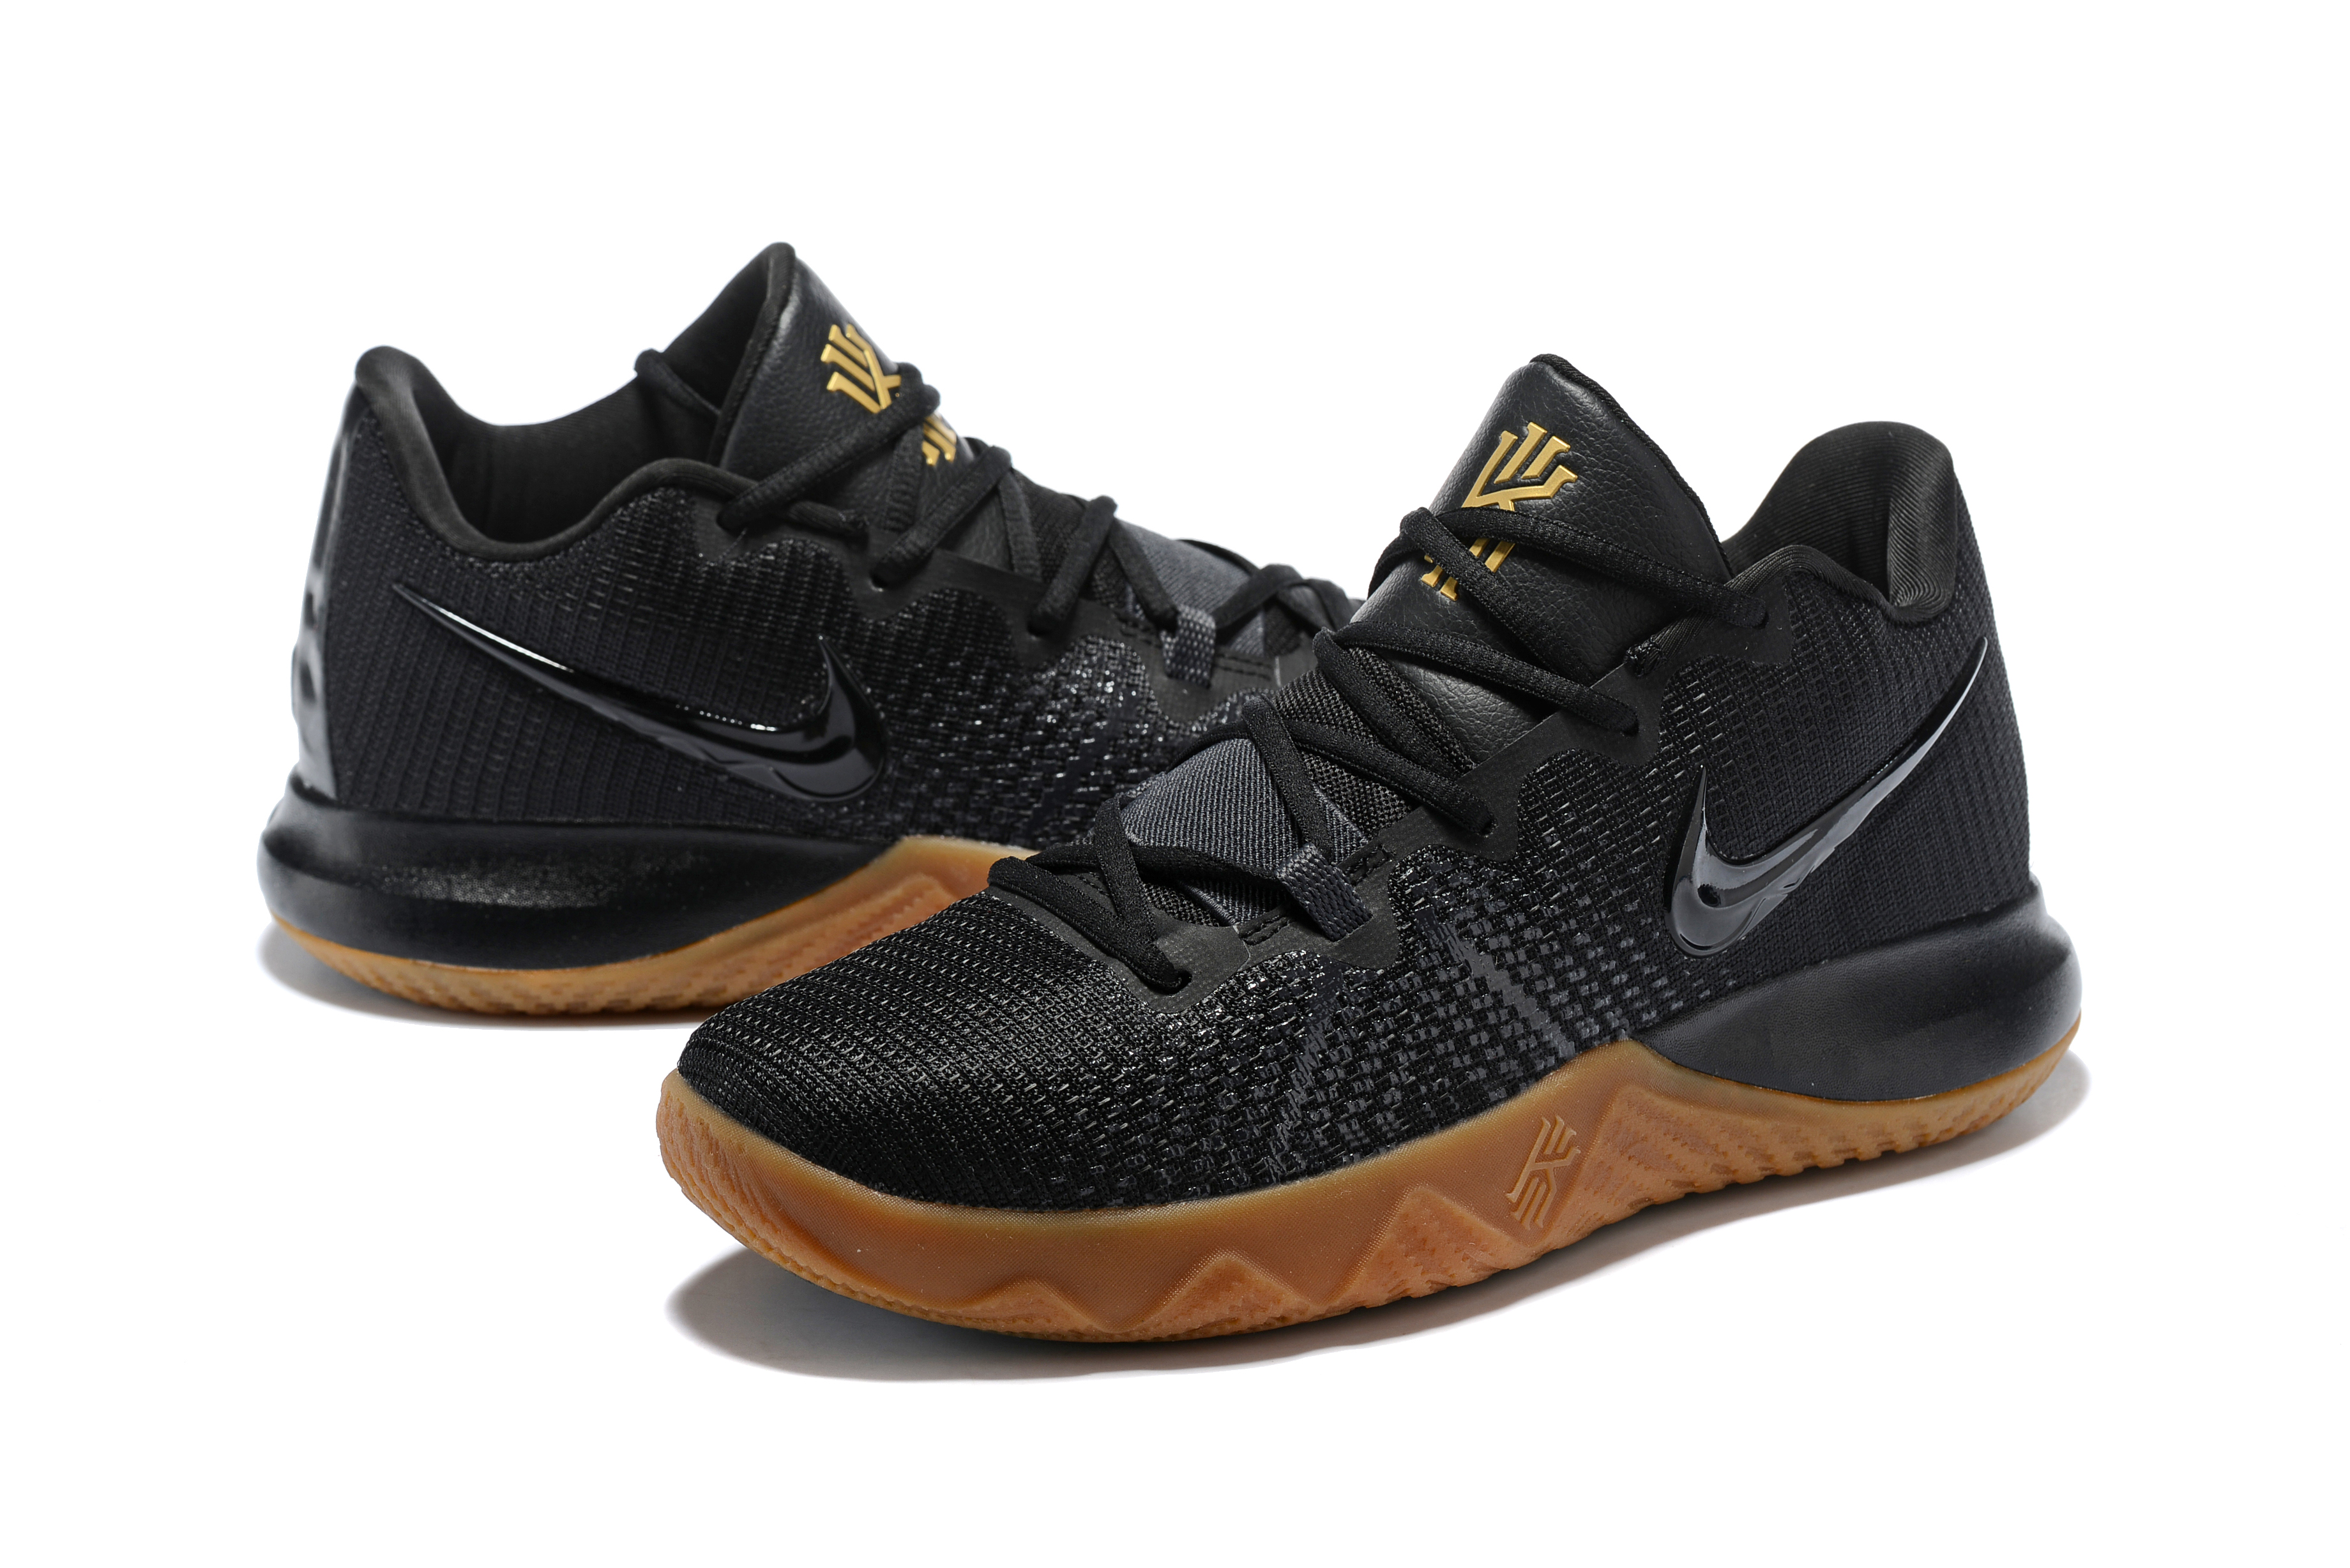 New Men Nike Kyrie Flytrap Black Brown Shoes - Click Image to Close